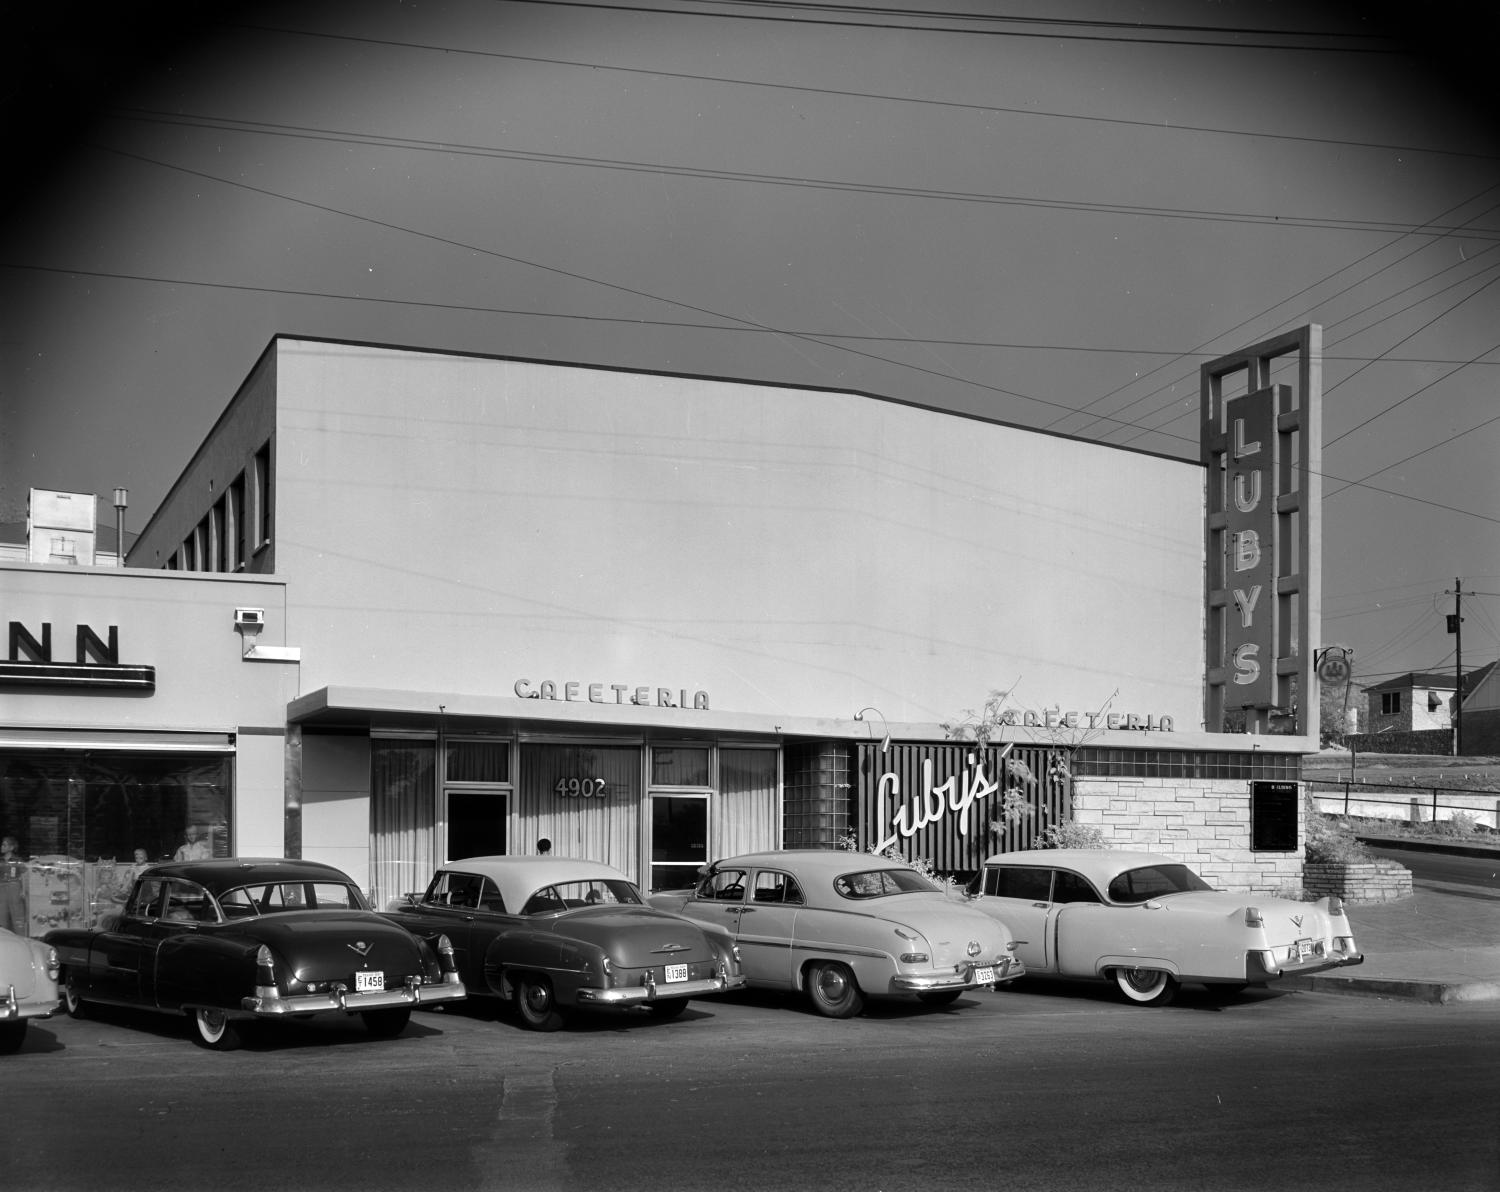 black and white, luby's cafeteria, exterior, vintage cars, signage